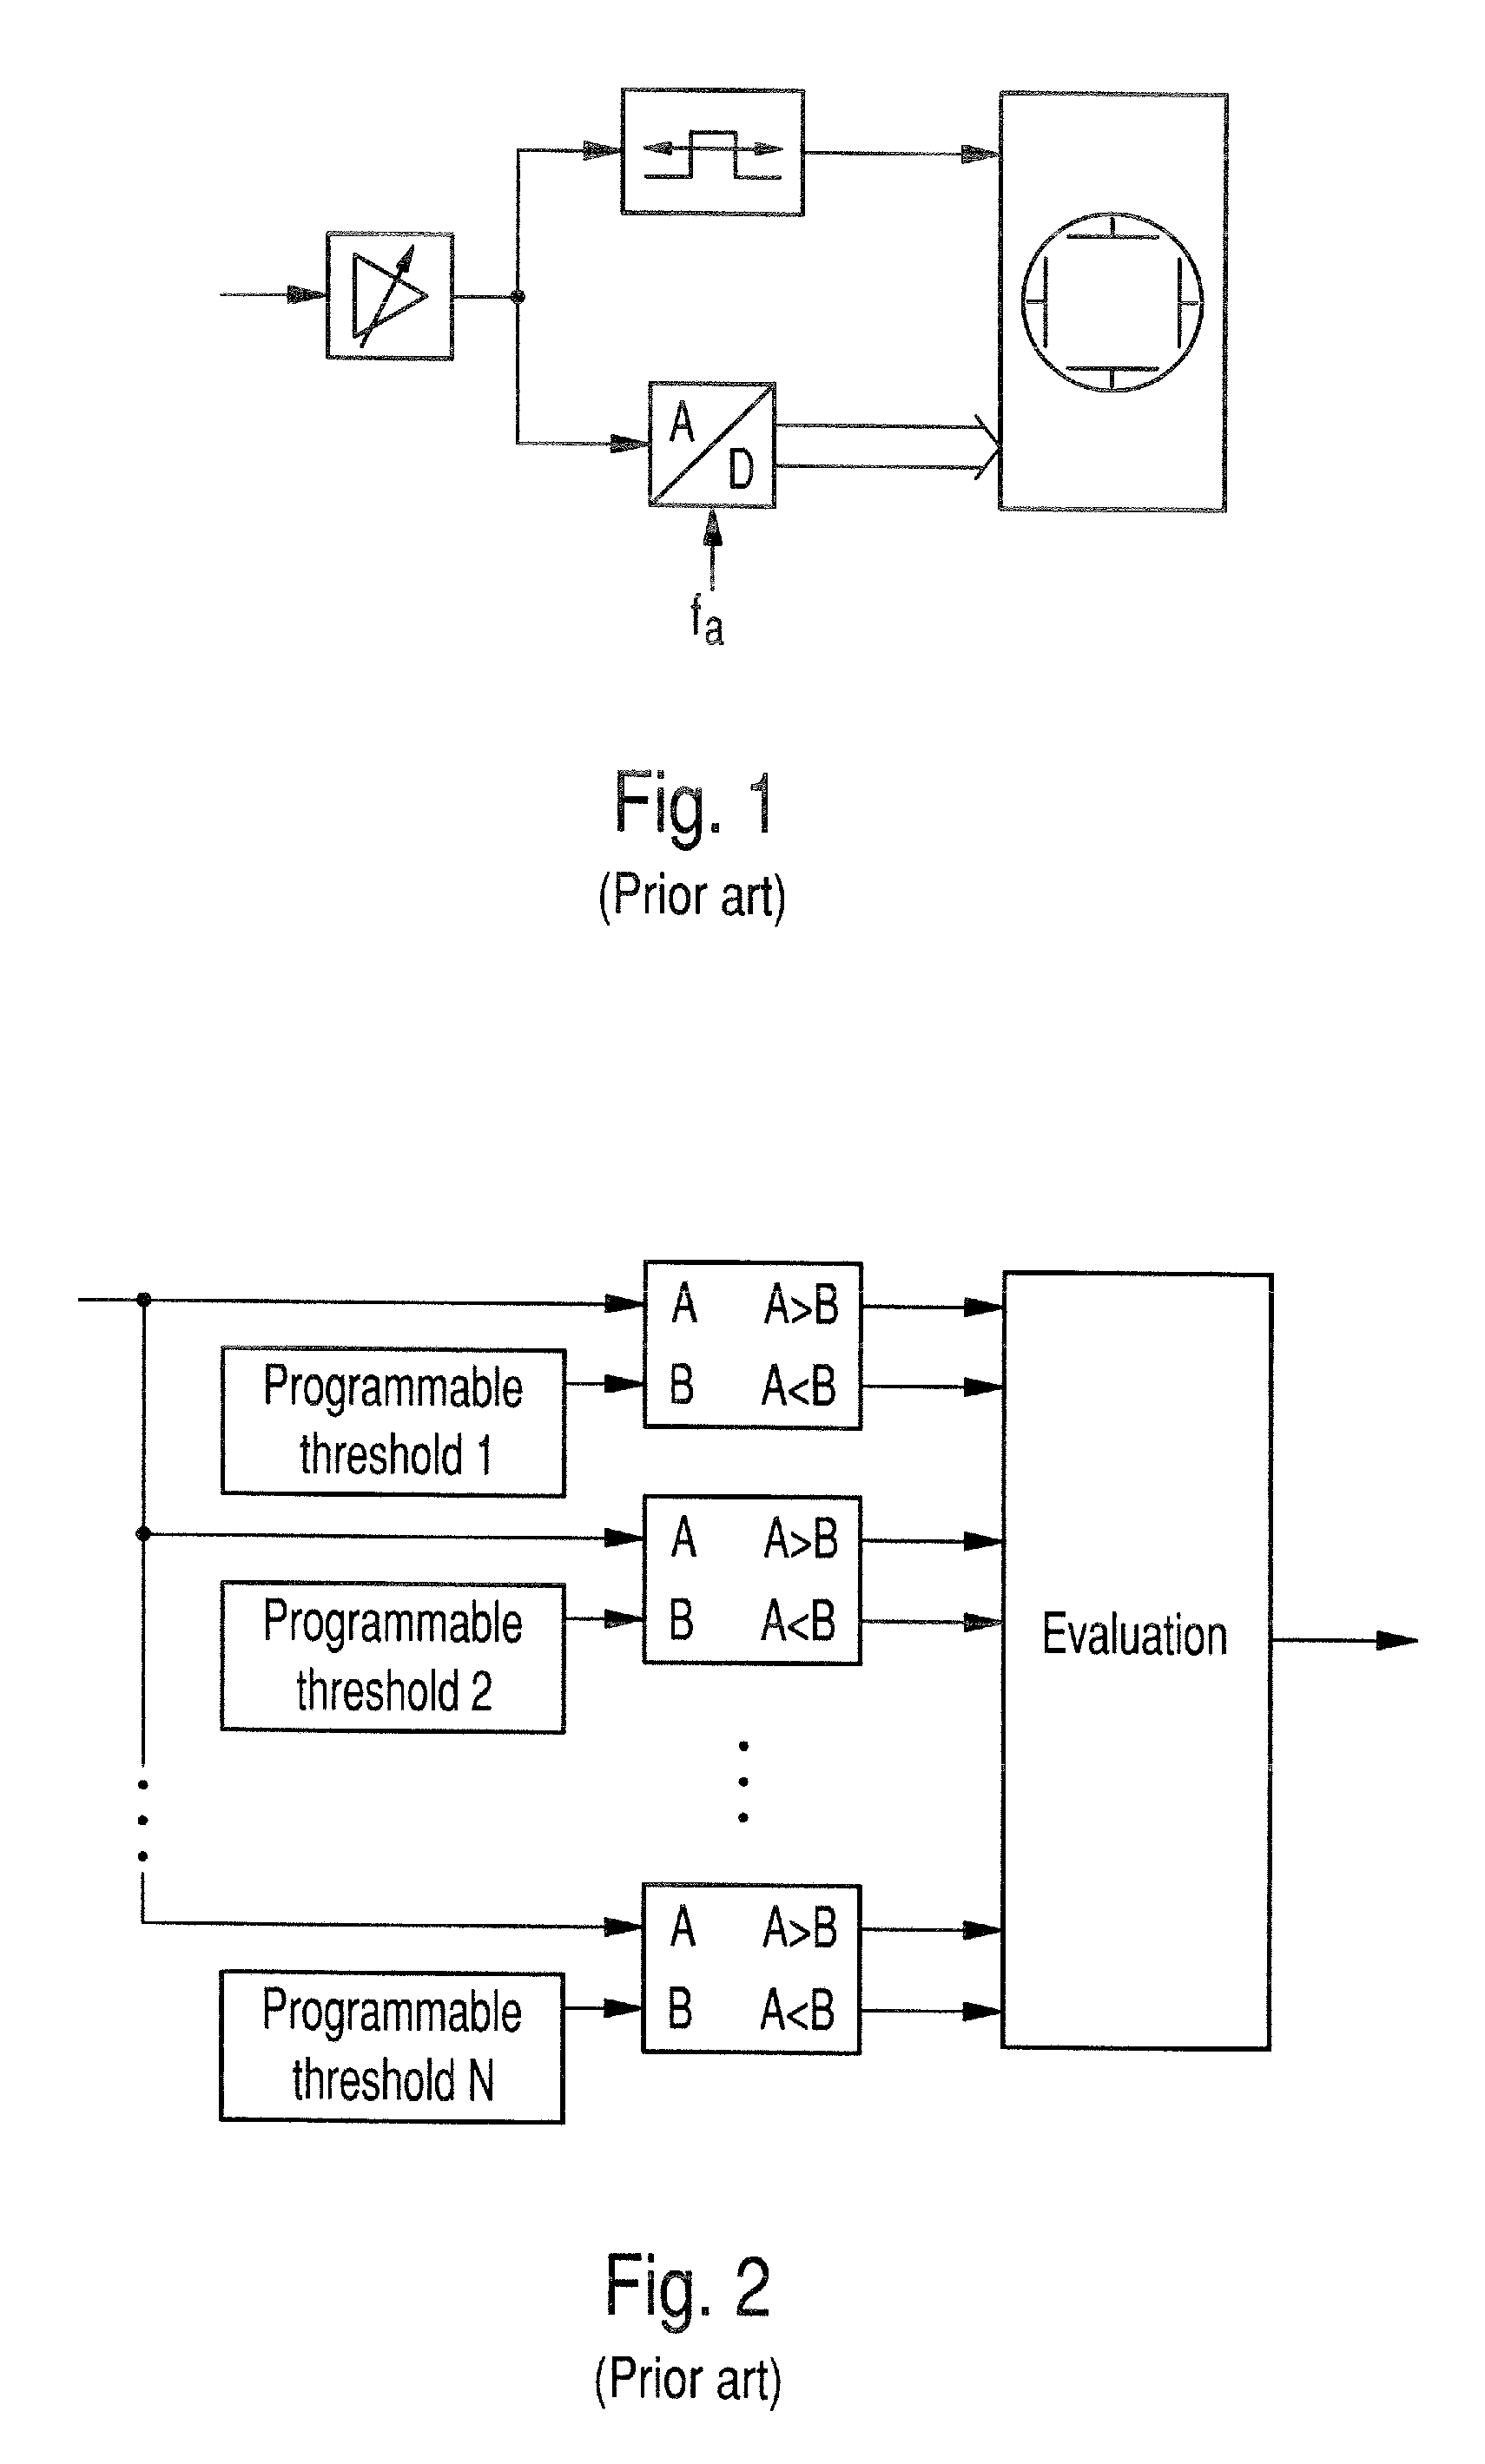 Method and System for Digital Triggering for an Oscilloscope